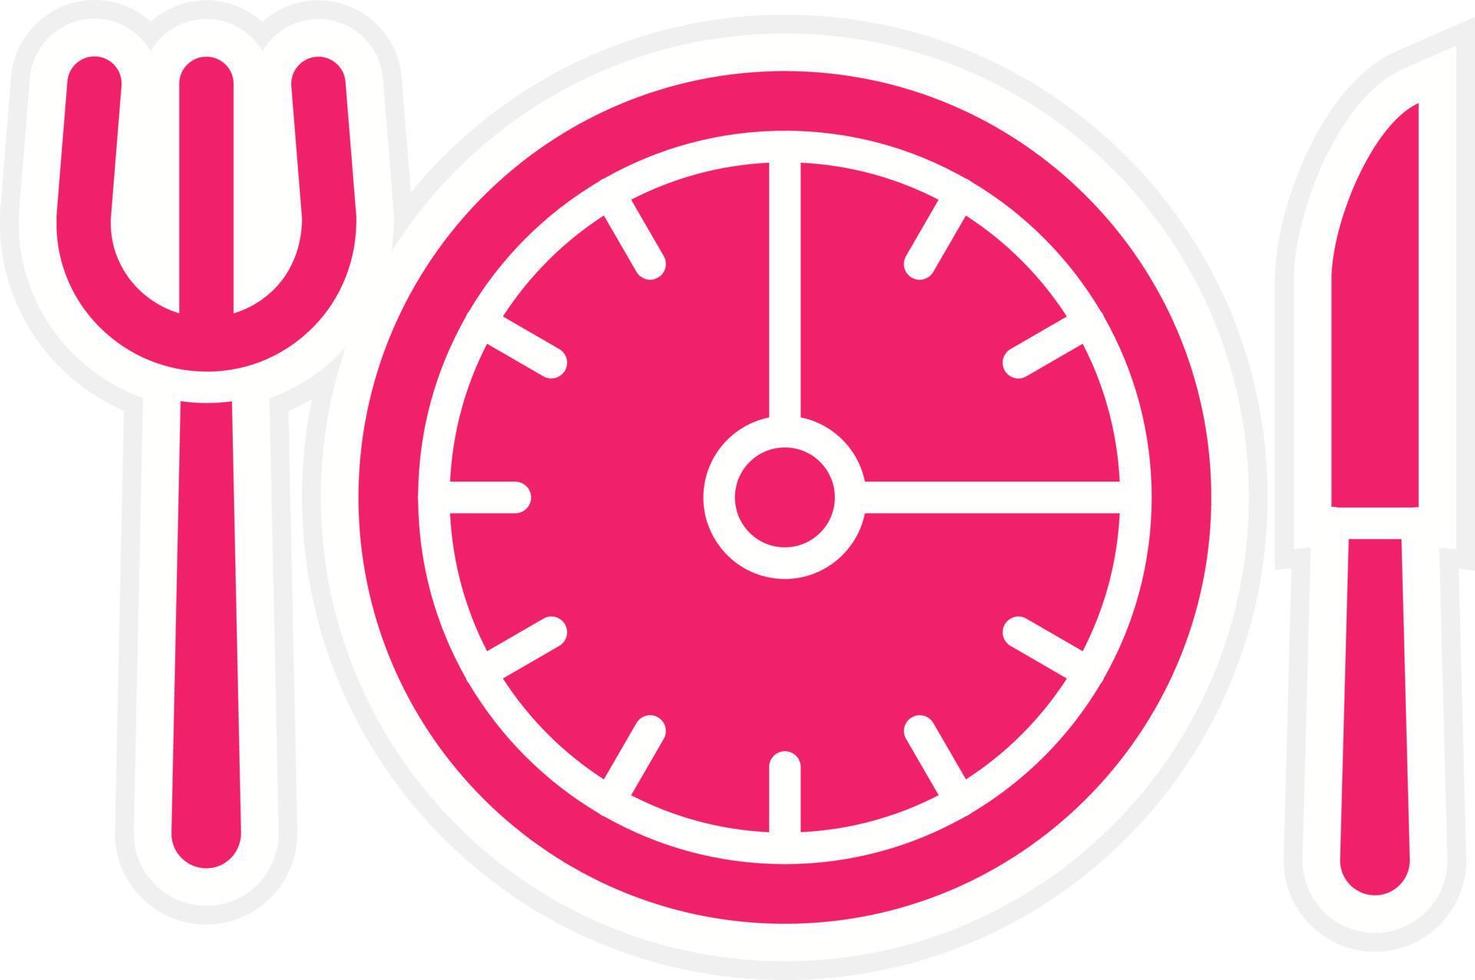 Intermittent Fasting Vector Icon Style